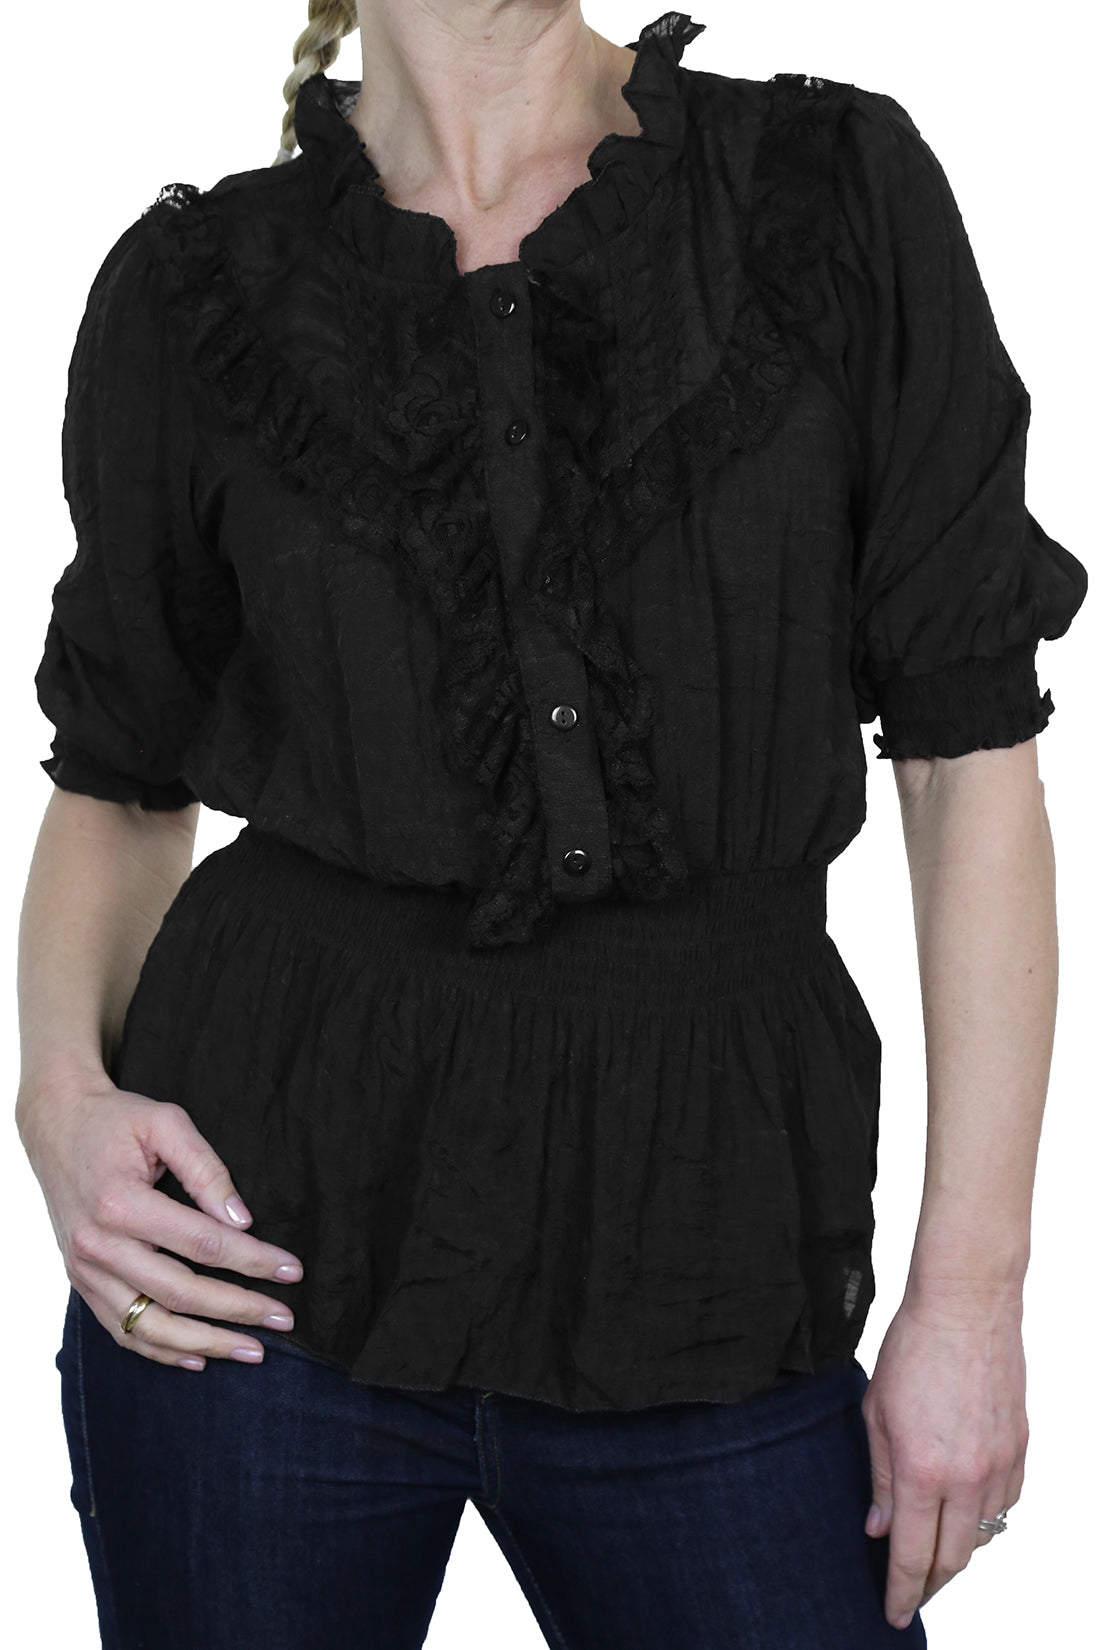 Romantic Style Tunic Shirt Top with Lace Black